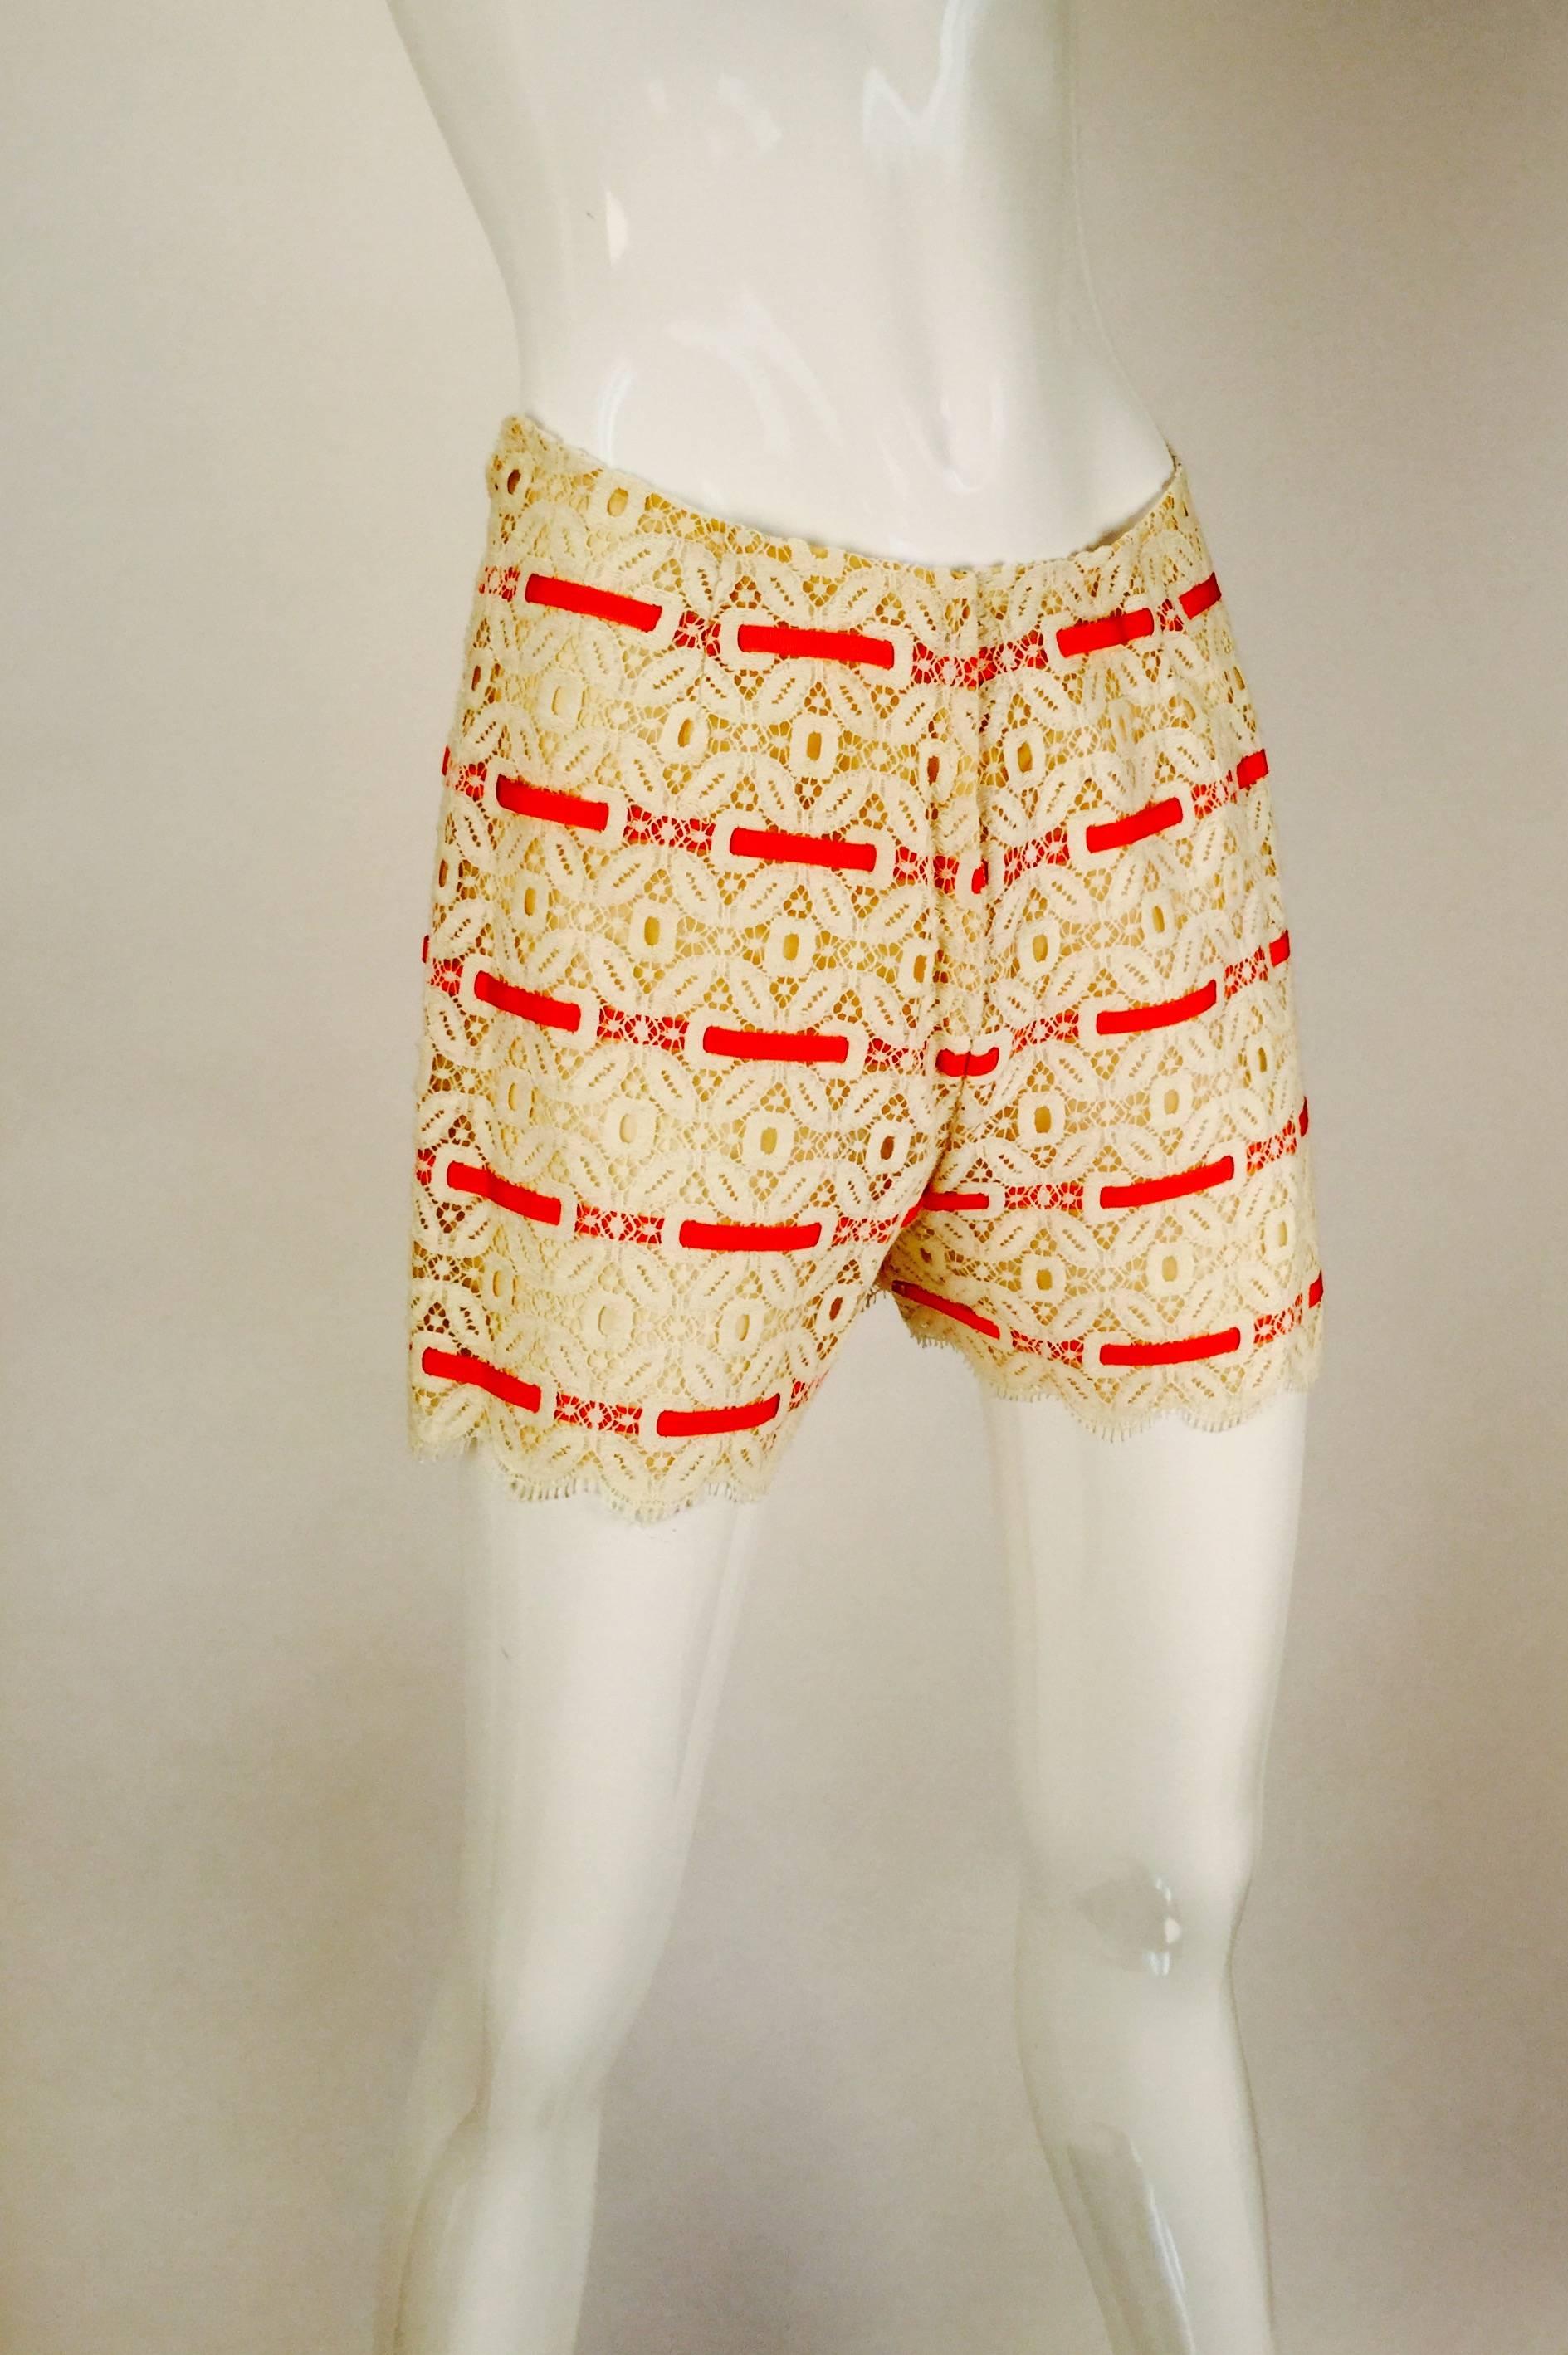 Esther Wolf Ribbon and Lace Overdress and Shorts / Hot Pants, 1970s  For Sale 1